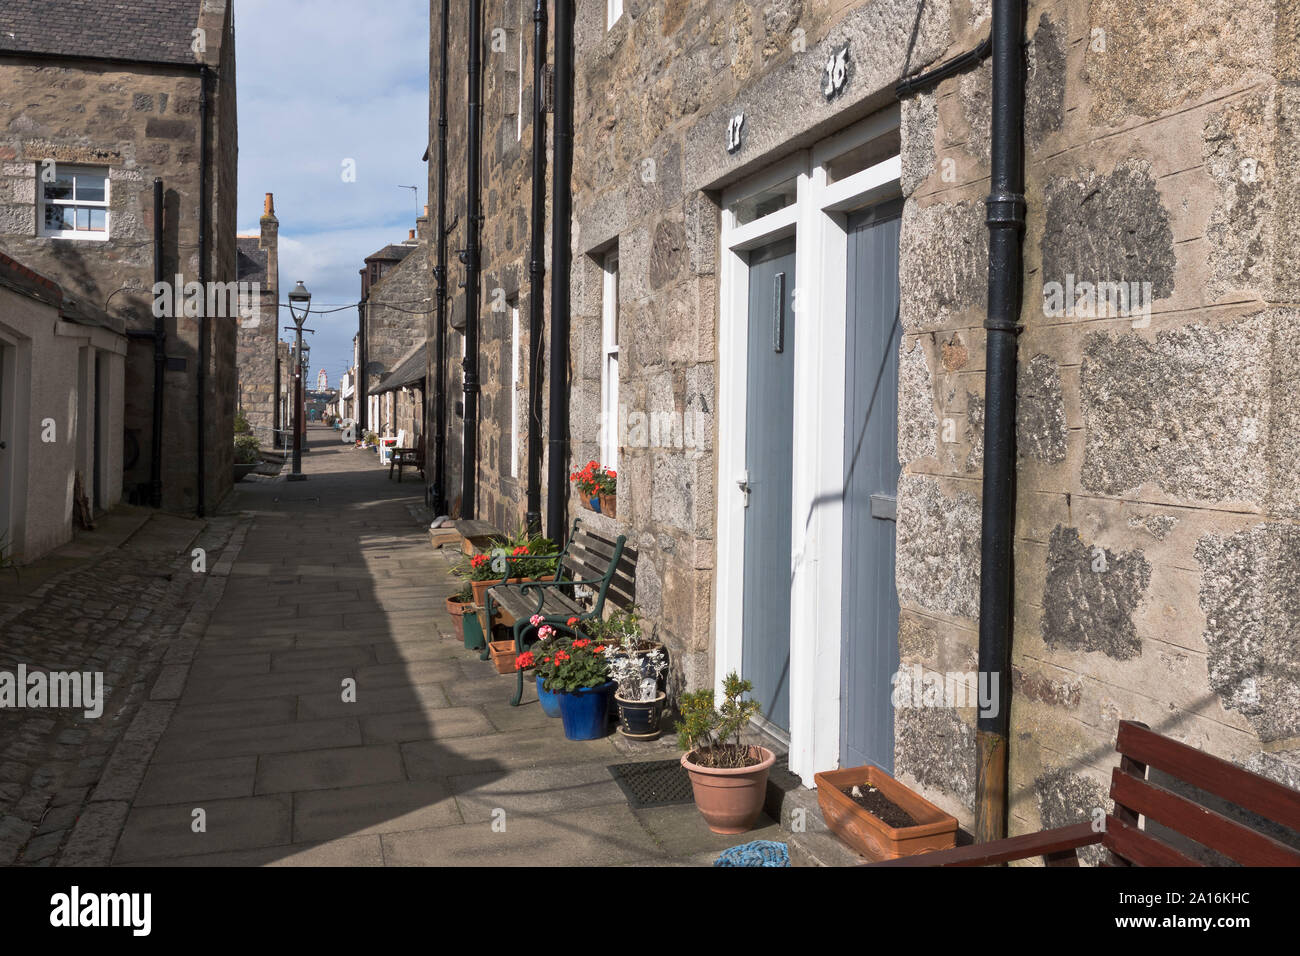 dh Fishing villages alley FOOTDEE VILLAGE ABERDEEN SCOTLAND Row of fishermans cottage houses in street homes buildings along narrow village lane Stock Photo